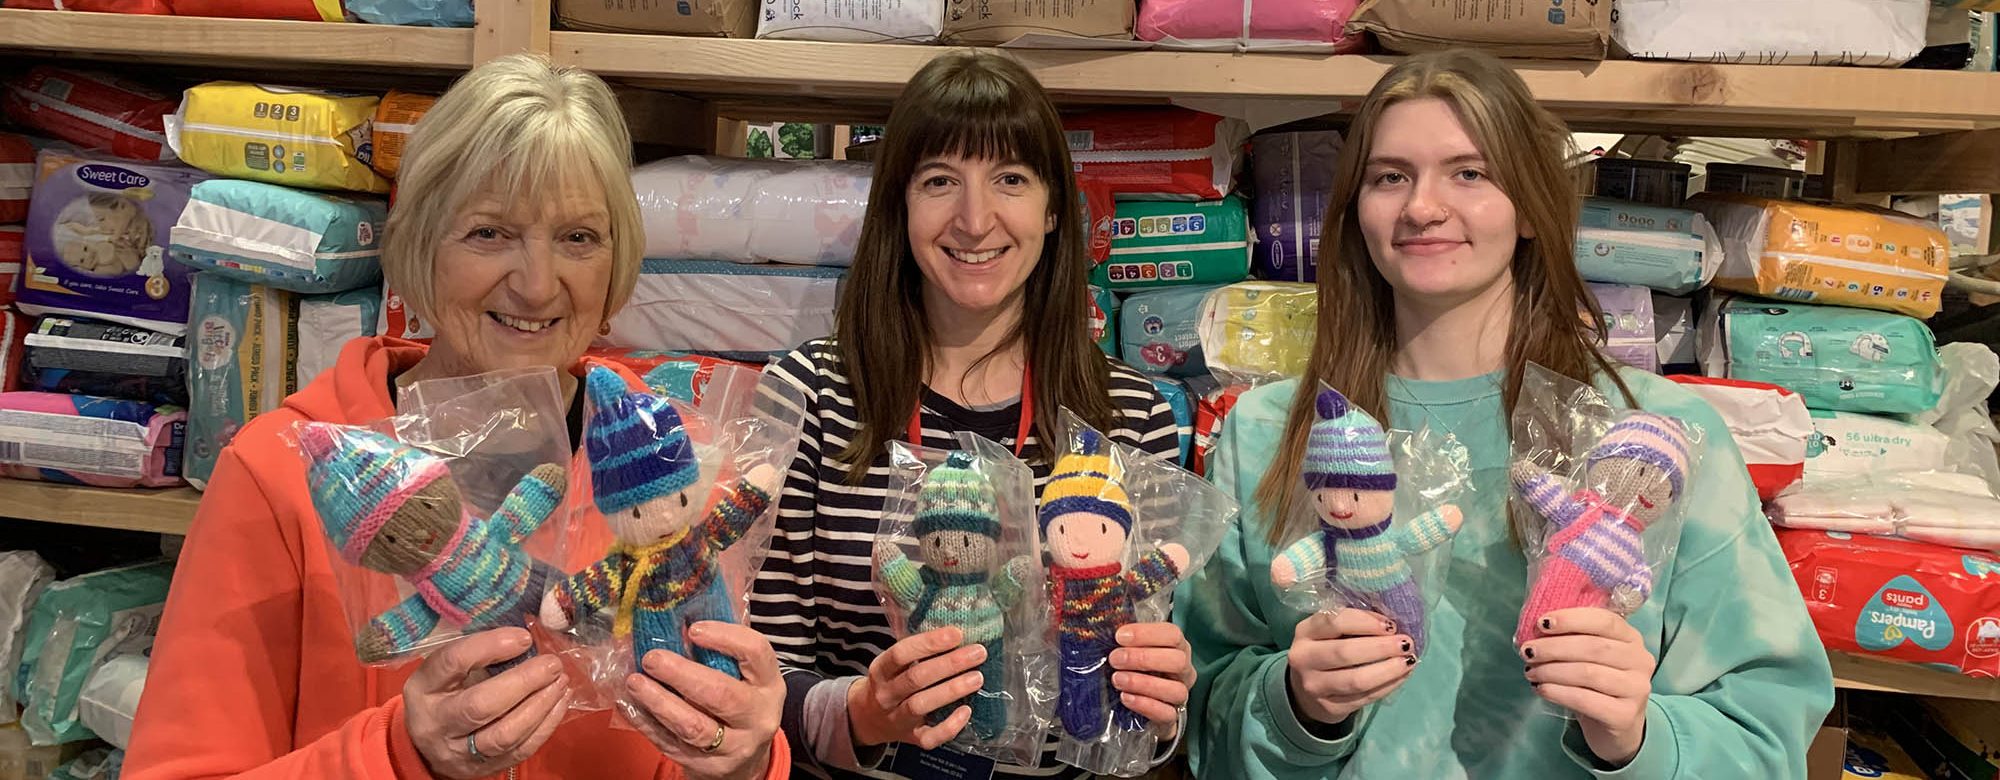 three women holding knitted dolls